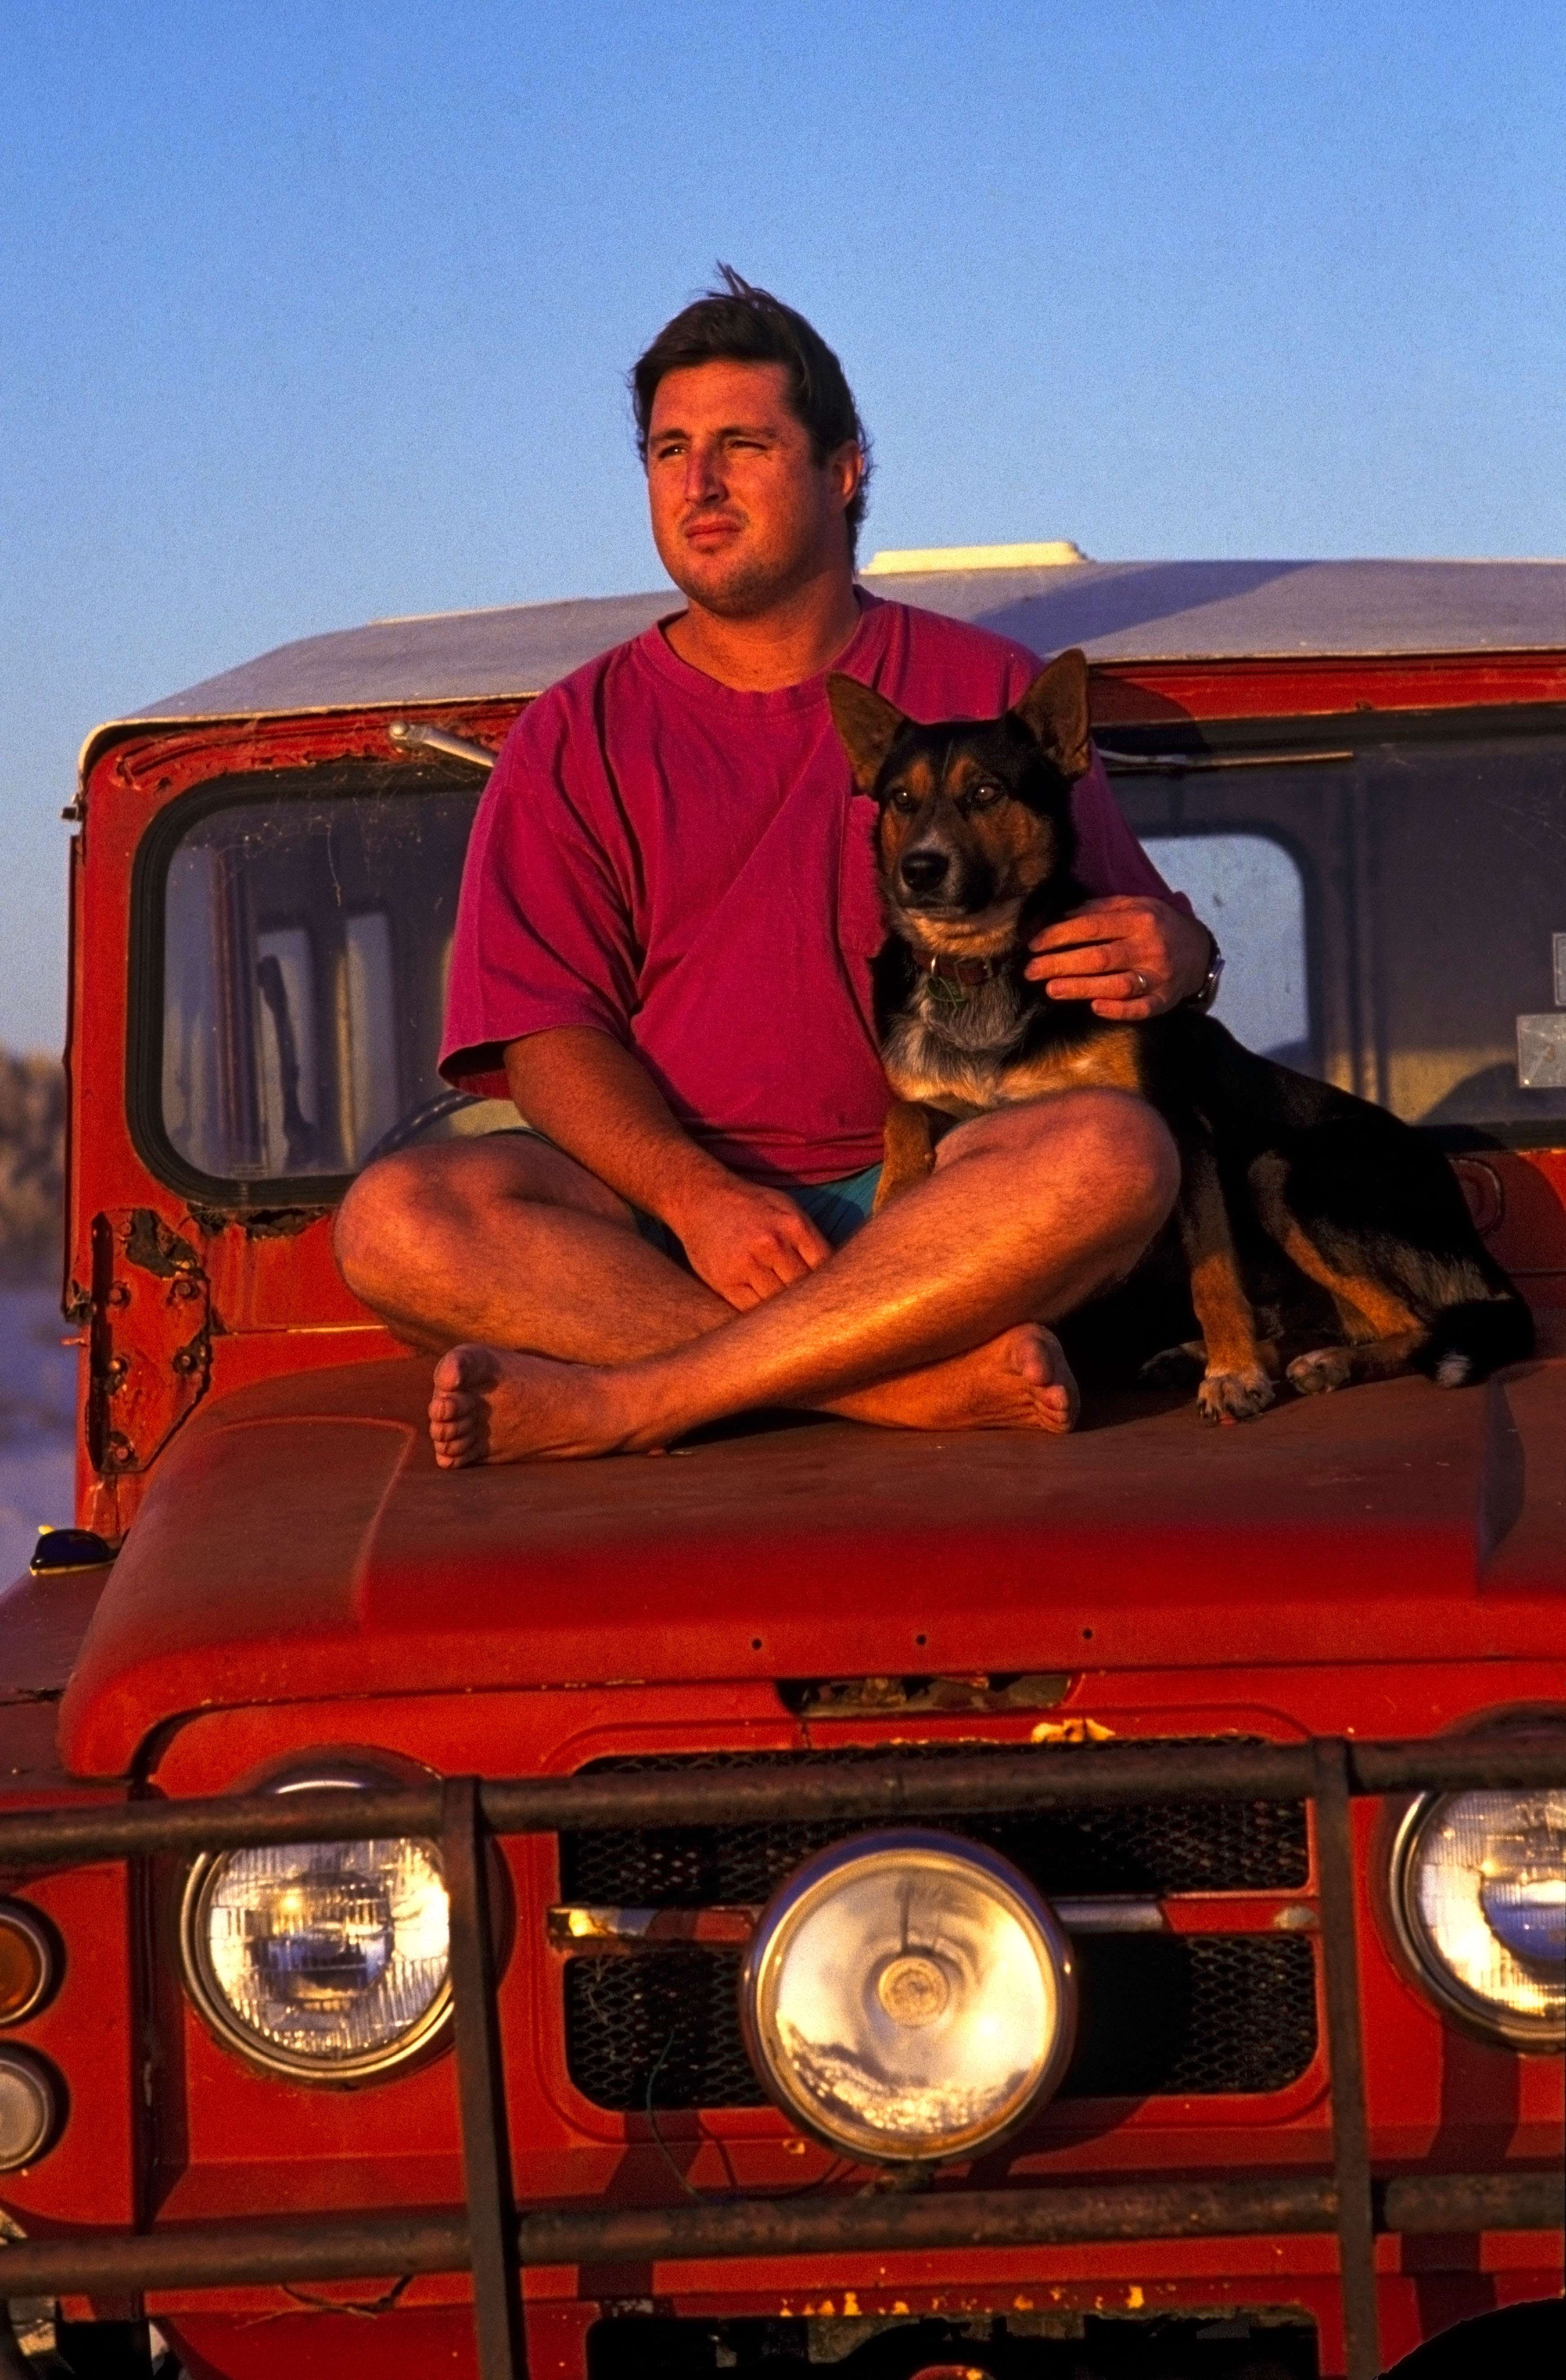 Australian author Tim Winton with his dog in 1993.